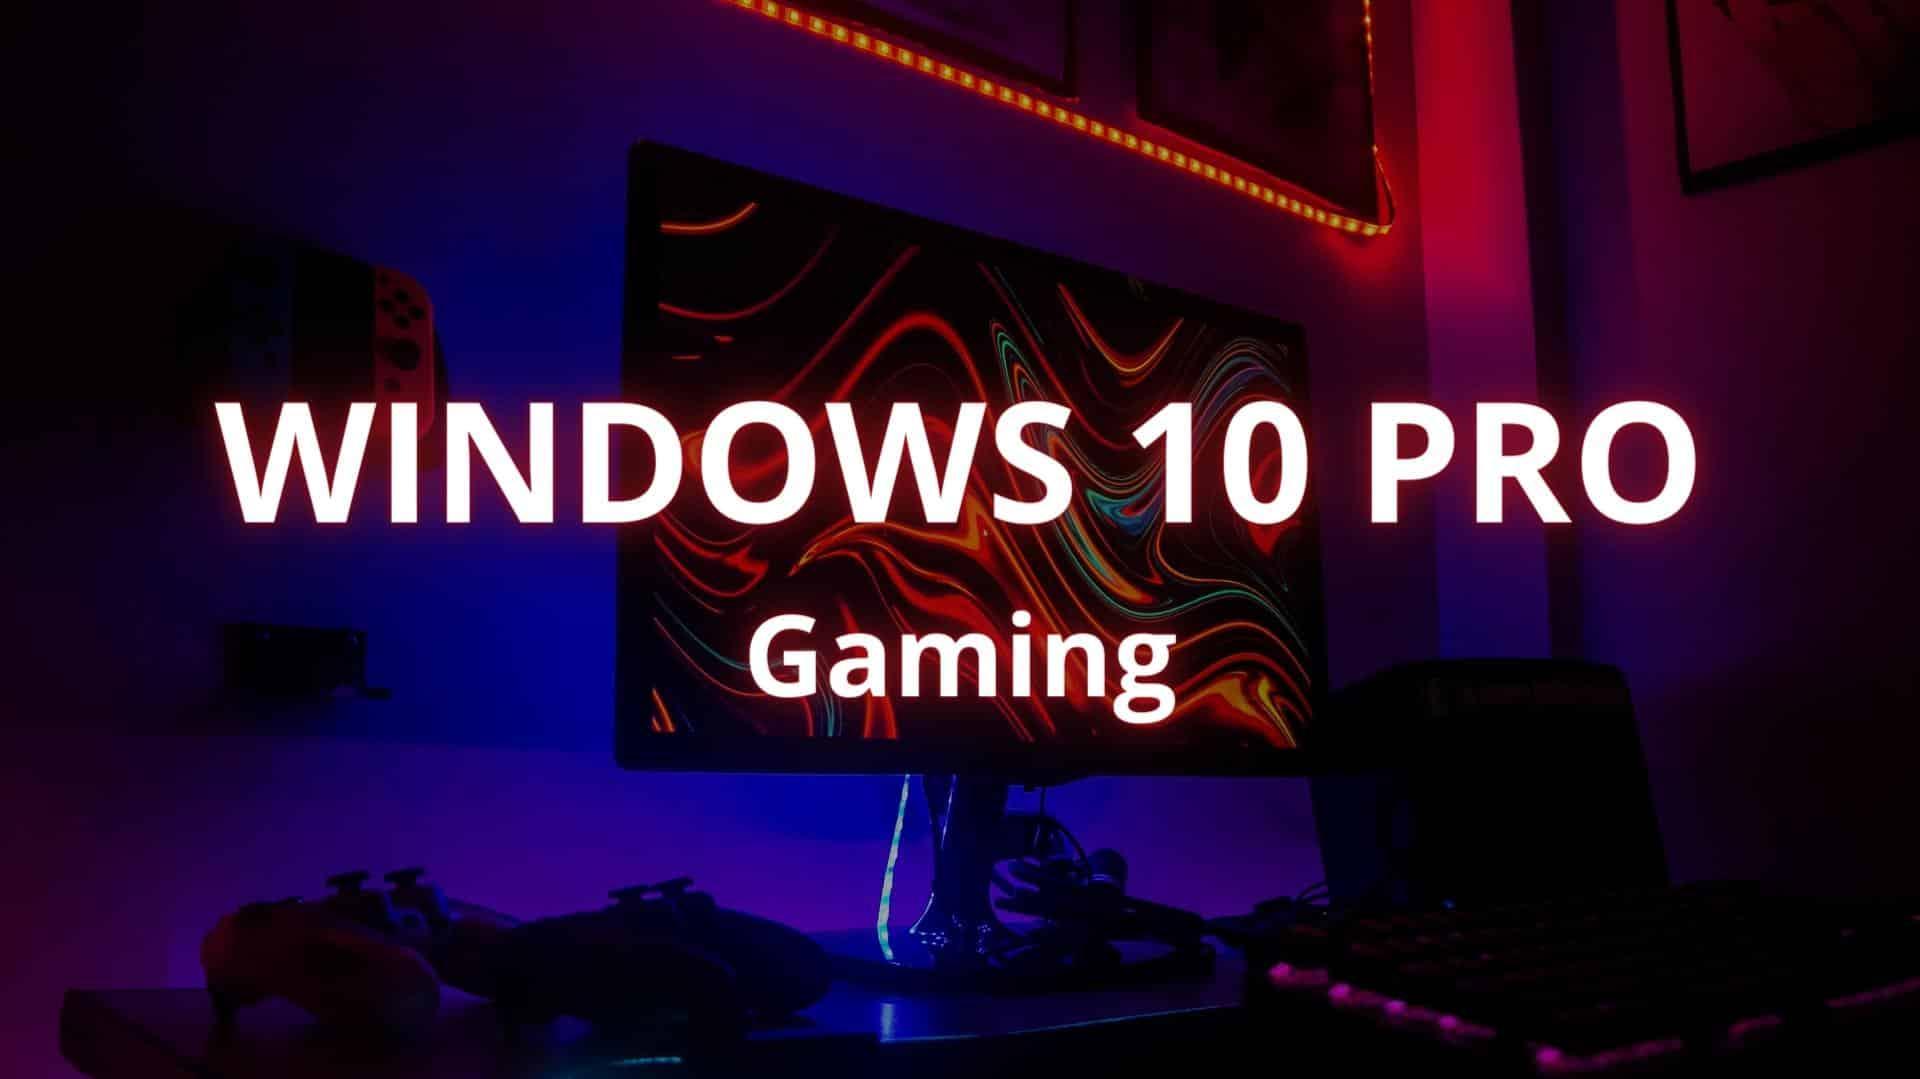 How to optimize Windows Pro for Gaming